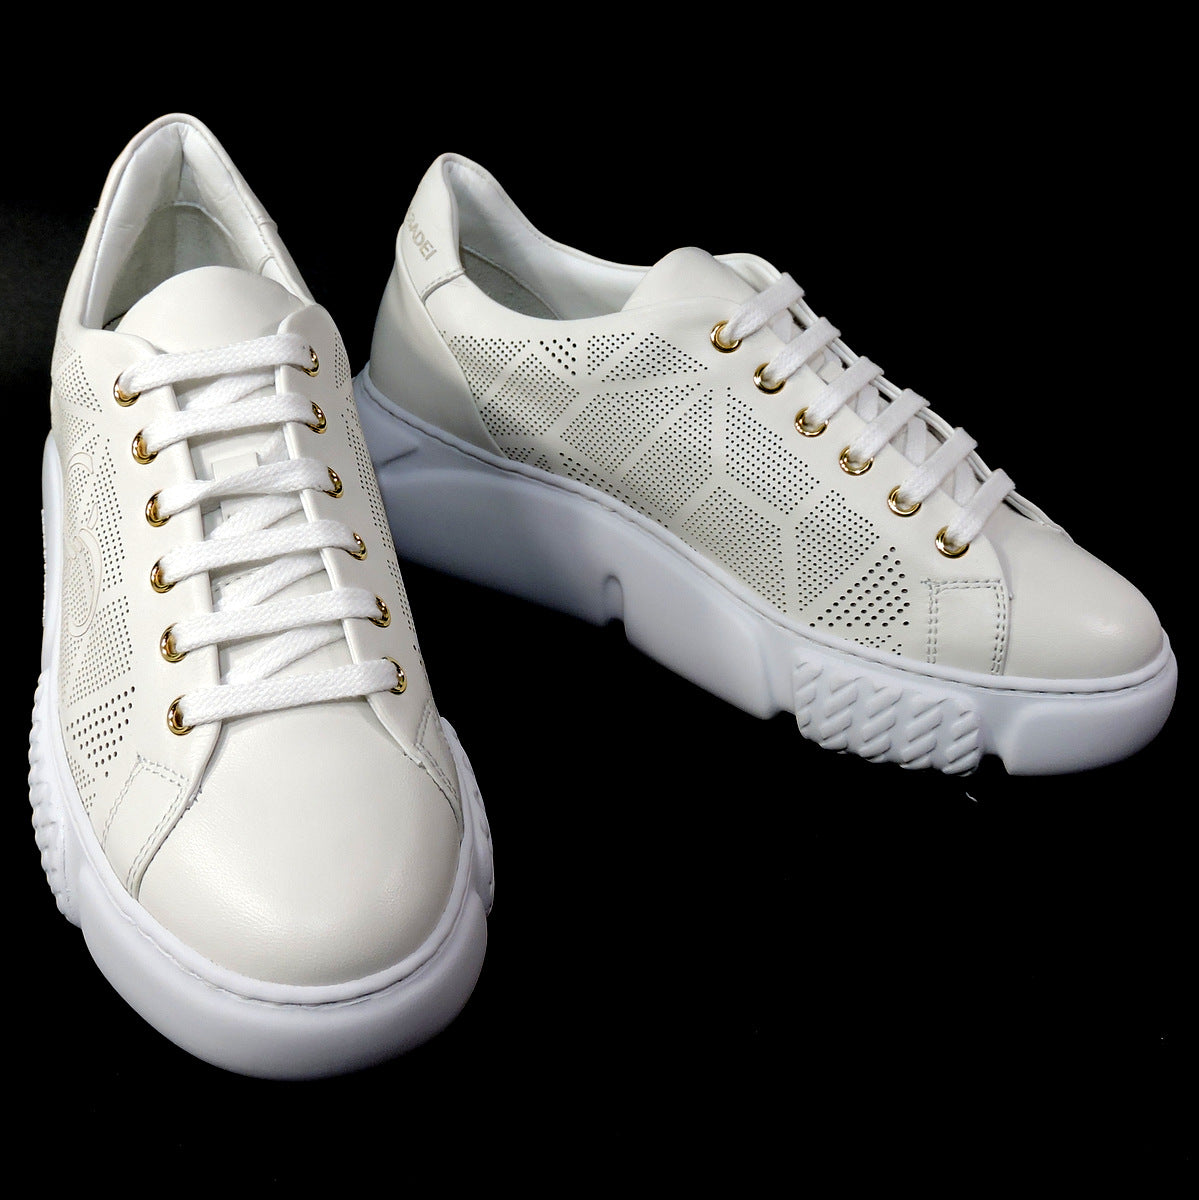 CASADEI 🇮🇹 WOMEN'S OFF WHITE LEATHER COMFORT FASHION SNEAKERS